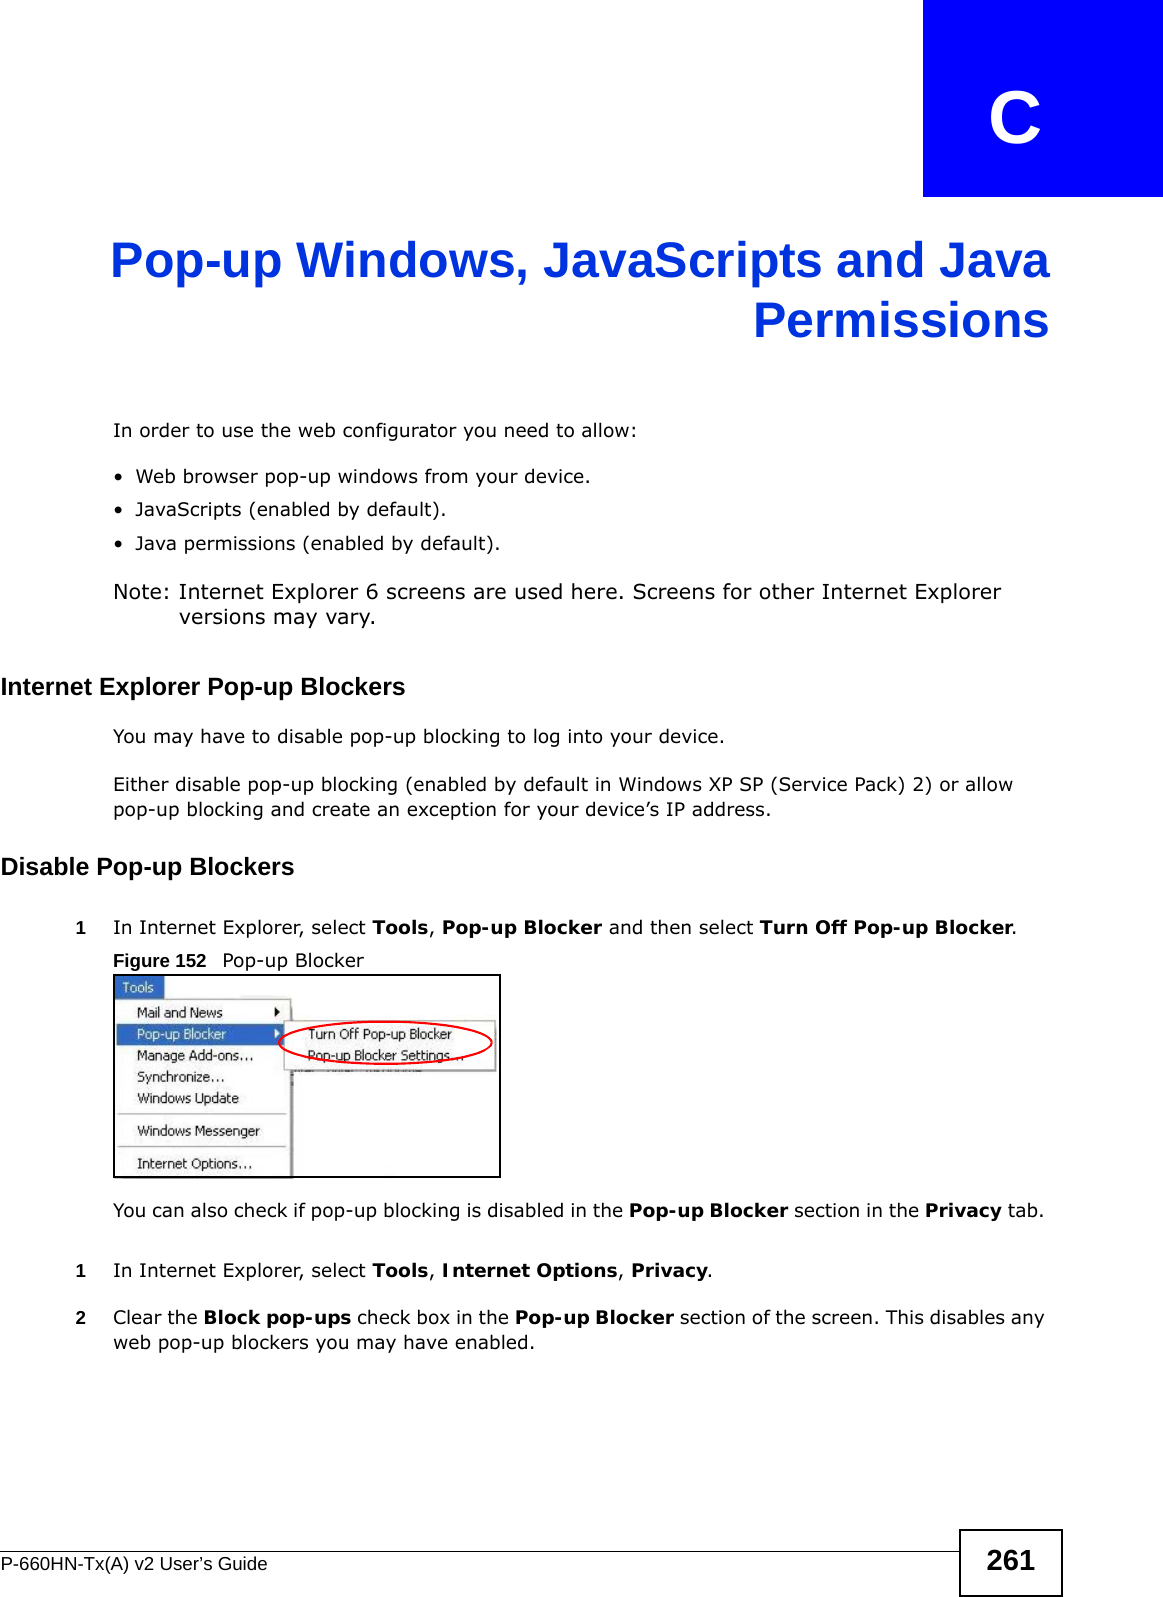 P-660HN-Tx(A) v2 User’s Guide 261APPENDIX   CPop-up Windows, JavaScripts and JavaPermissionsIn order to use the web configurator you need to allow:• Web browser pop-up windows from your device.• JavaScripts (enabled by default).• Java permissions (enabled by default).Note: Internet Explorer 6 screens are used here. Screens for other Internet Explorer versions may vary.Internet Explorer Pop-up BlockersYou may have to disable pop-up blocking to log into your device. Either disable pop-up blocking (enabled by default in Windows XP SP (Service Pack) 2) or allow pop-up blocking and create an exception for your device’s IP address.Disable Pop-up Blockers1In Internet Explorer, select Tools, Pop-up Blocker and then select Turn Off Pop-up Blocker. Figure 152   Pop-up BlockerYou can also check if pop-up blocking is disabled in the Pop-up Blocker section in the Privacy tab. 1In Internet Explorer, select Tools, Internet Options, Privacy.2Clear the Block pop-ups check box in the Pop-up Blocker section of the screen. This disables any web pop-up blockers you may have enabled. 